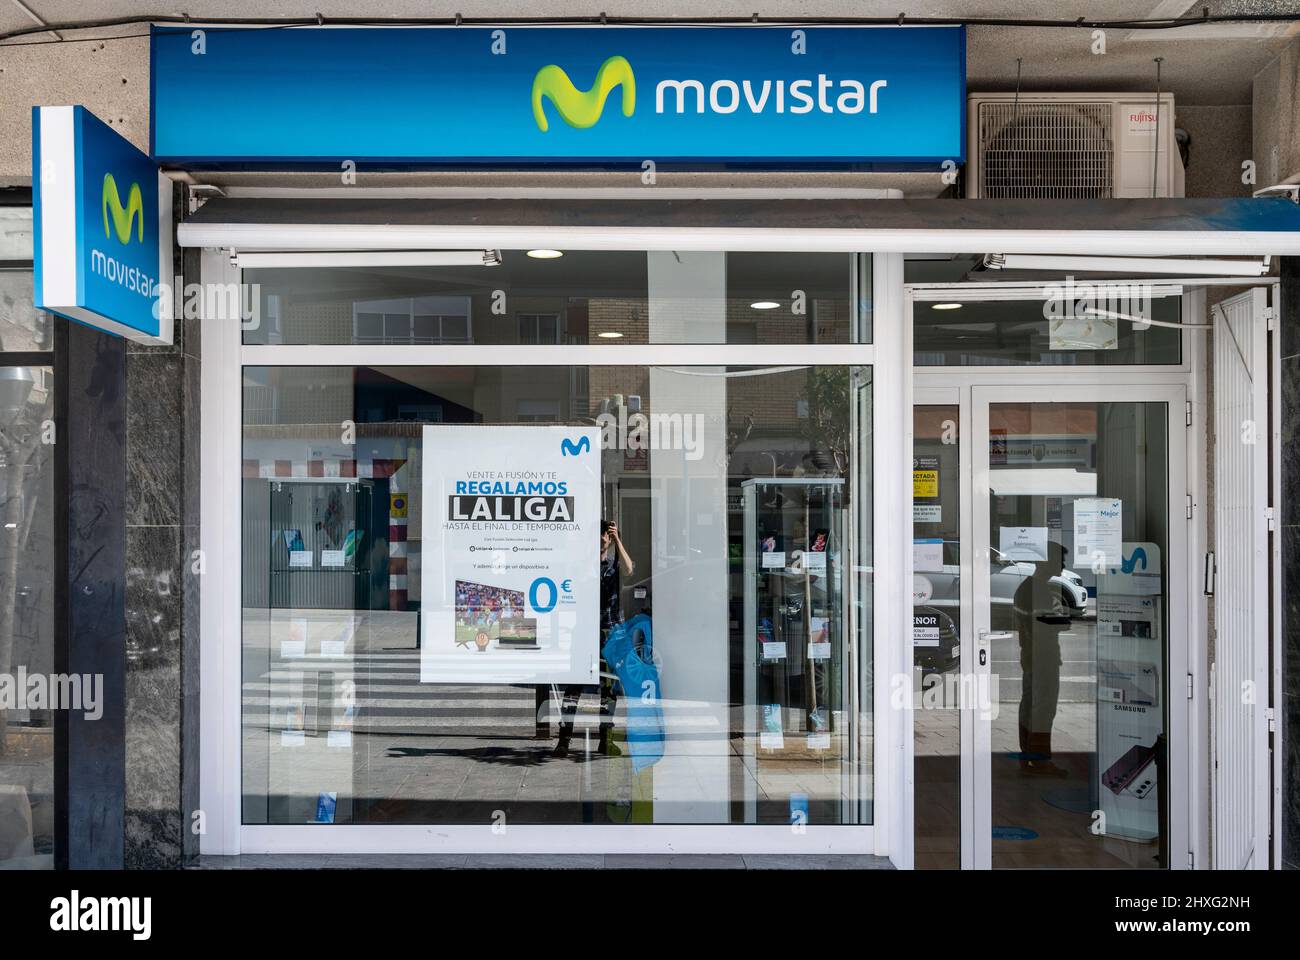 Spanish telecommunications brand owned by Telefonica and largest mobile phone operator, Movistar, store seen in Spain. Stock Photo